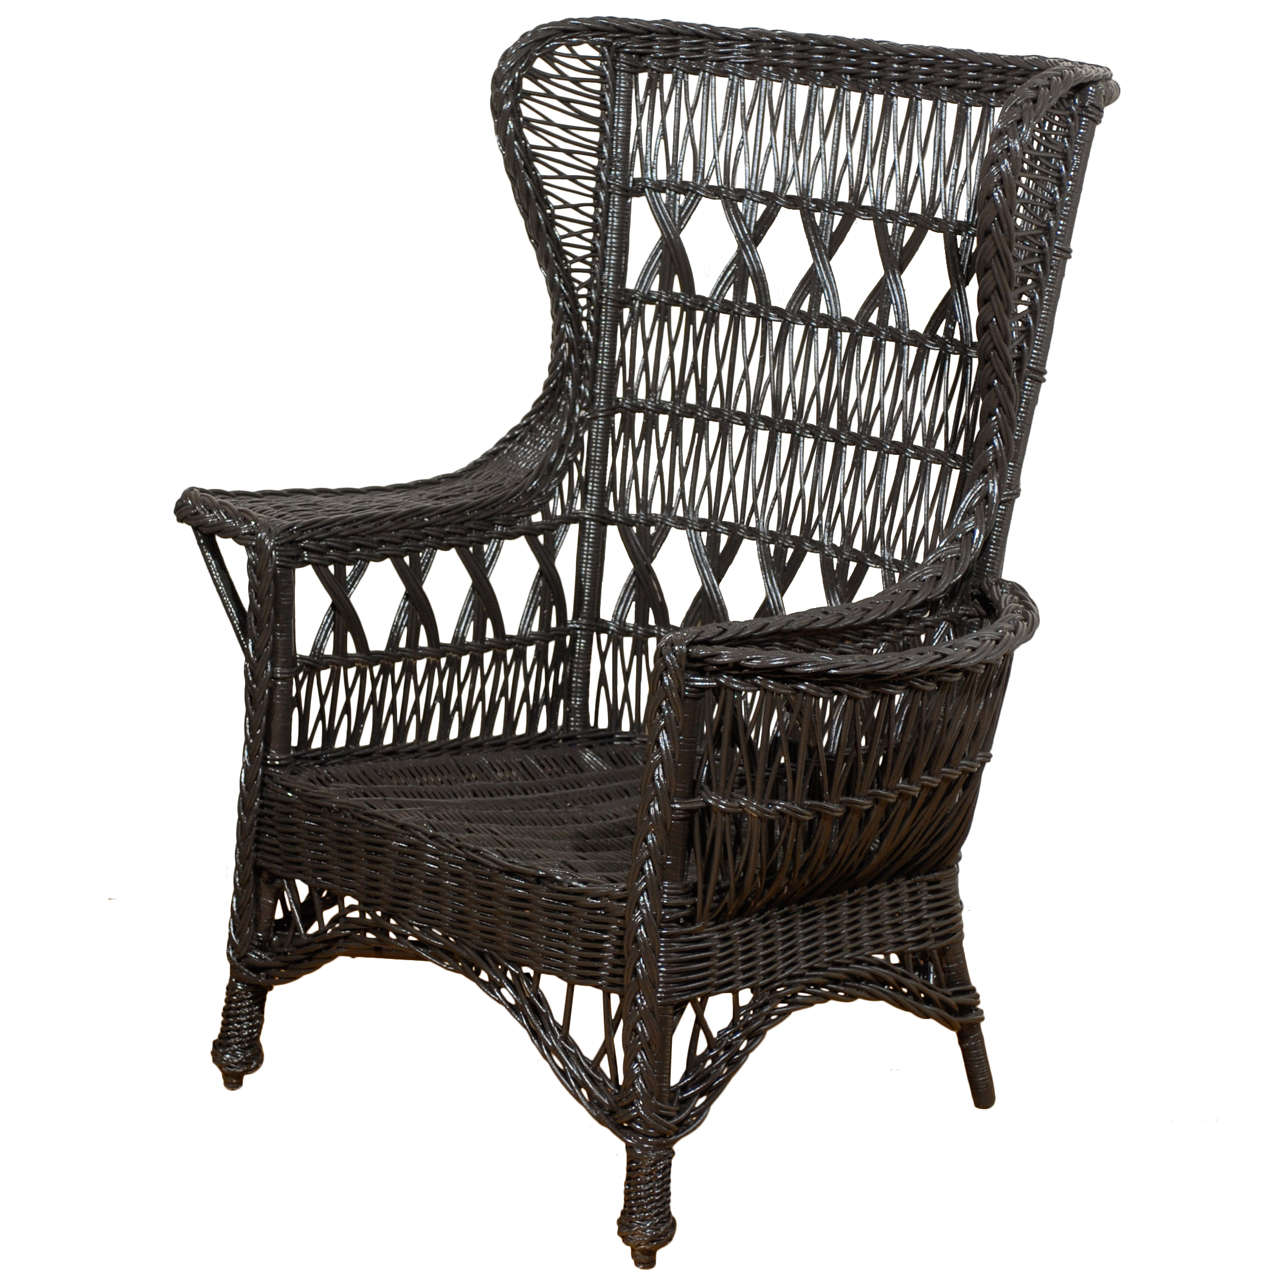 Antique American Wicker Wing Chair With Magazine Pocket At 1stdibs